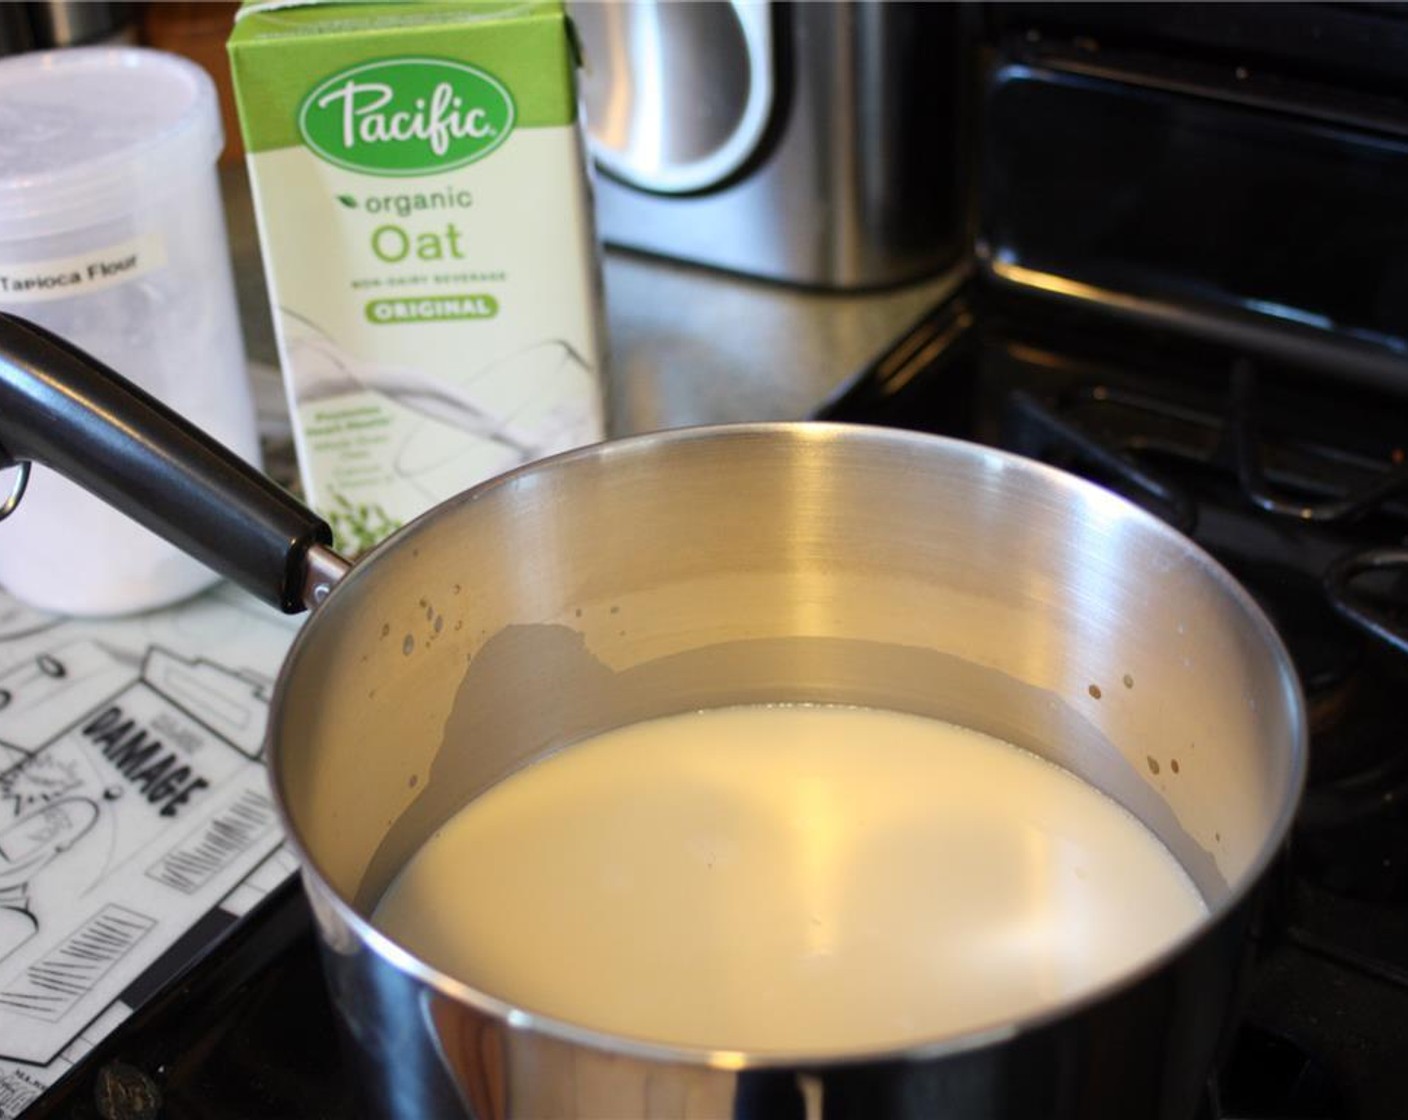 step 1 Heat the Oat Milk (4 cups) in a saucepan over high heat until it begins to boil.